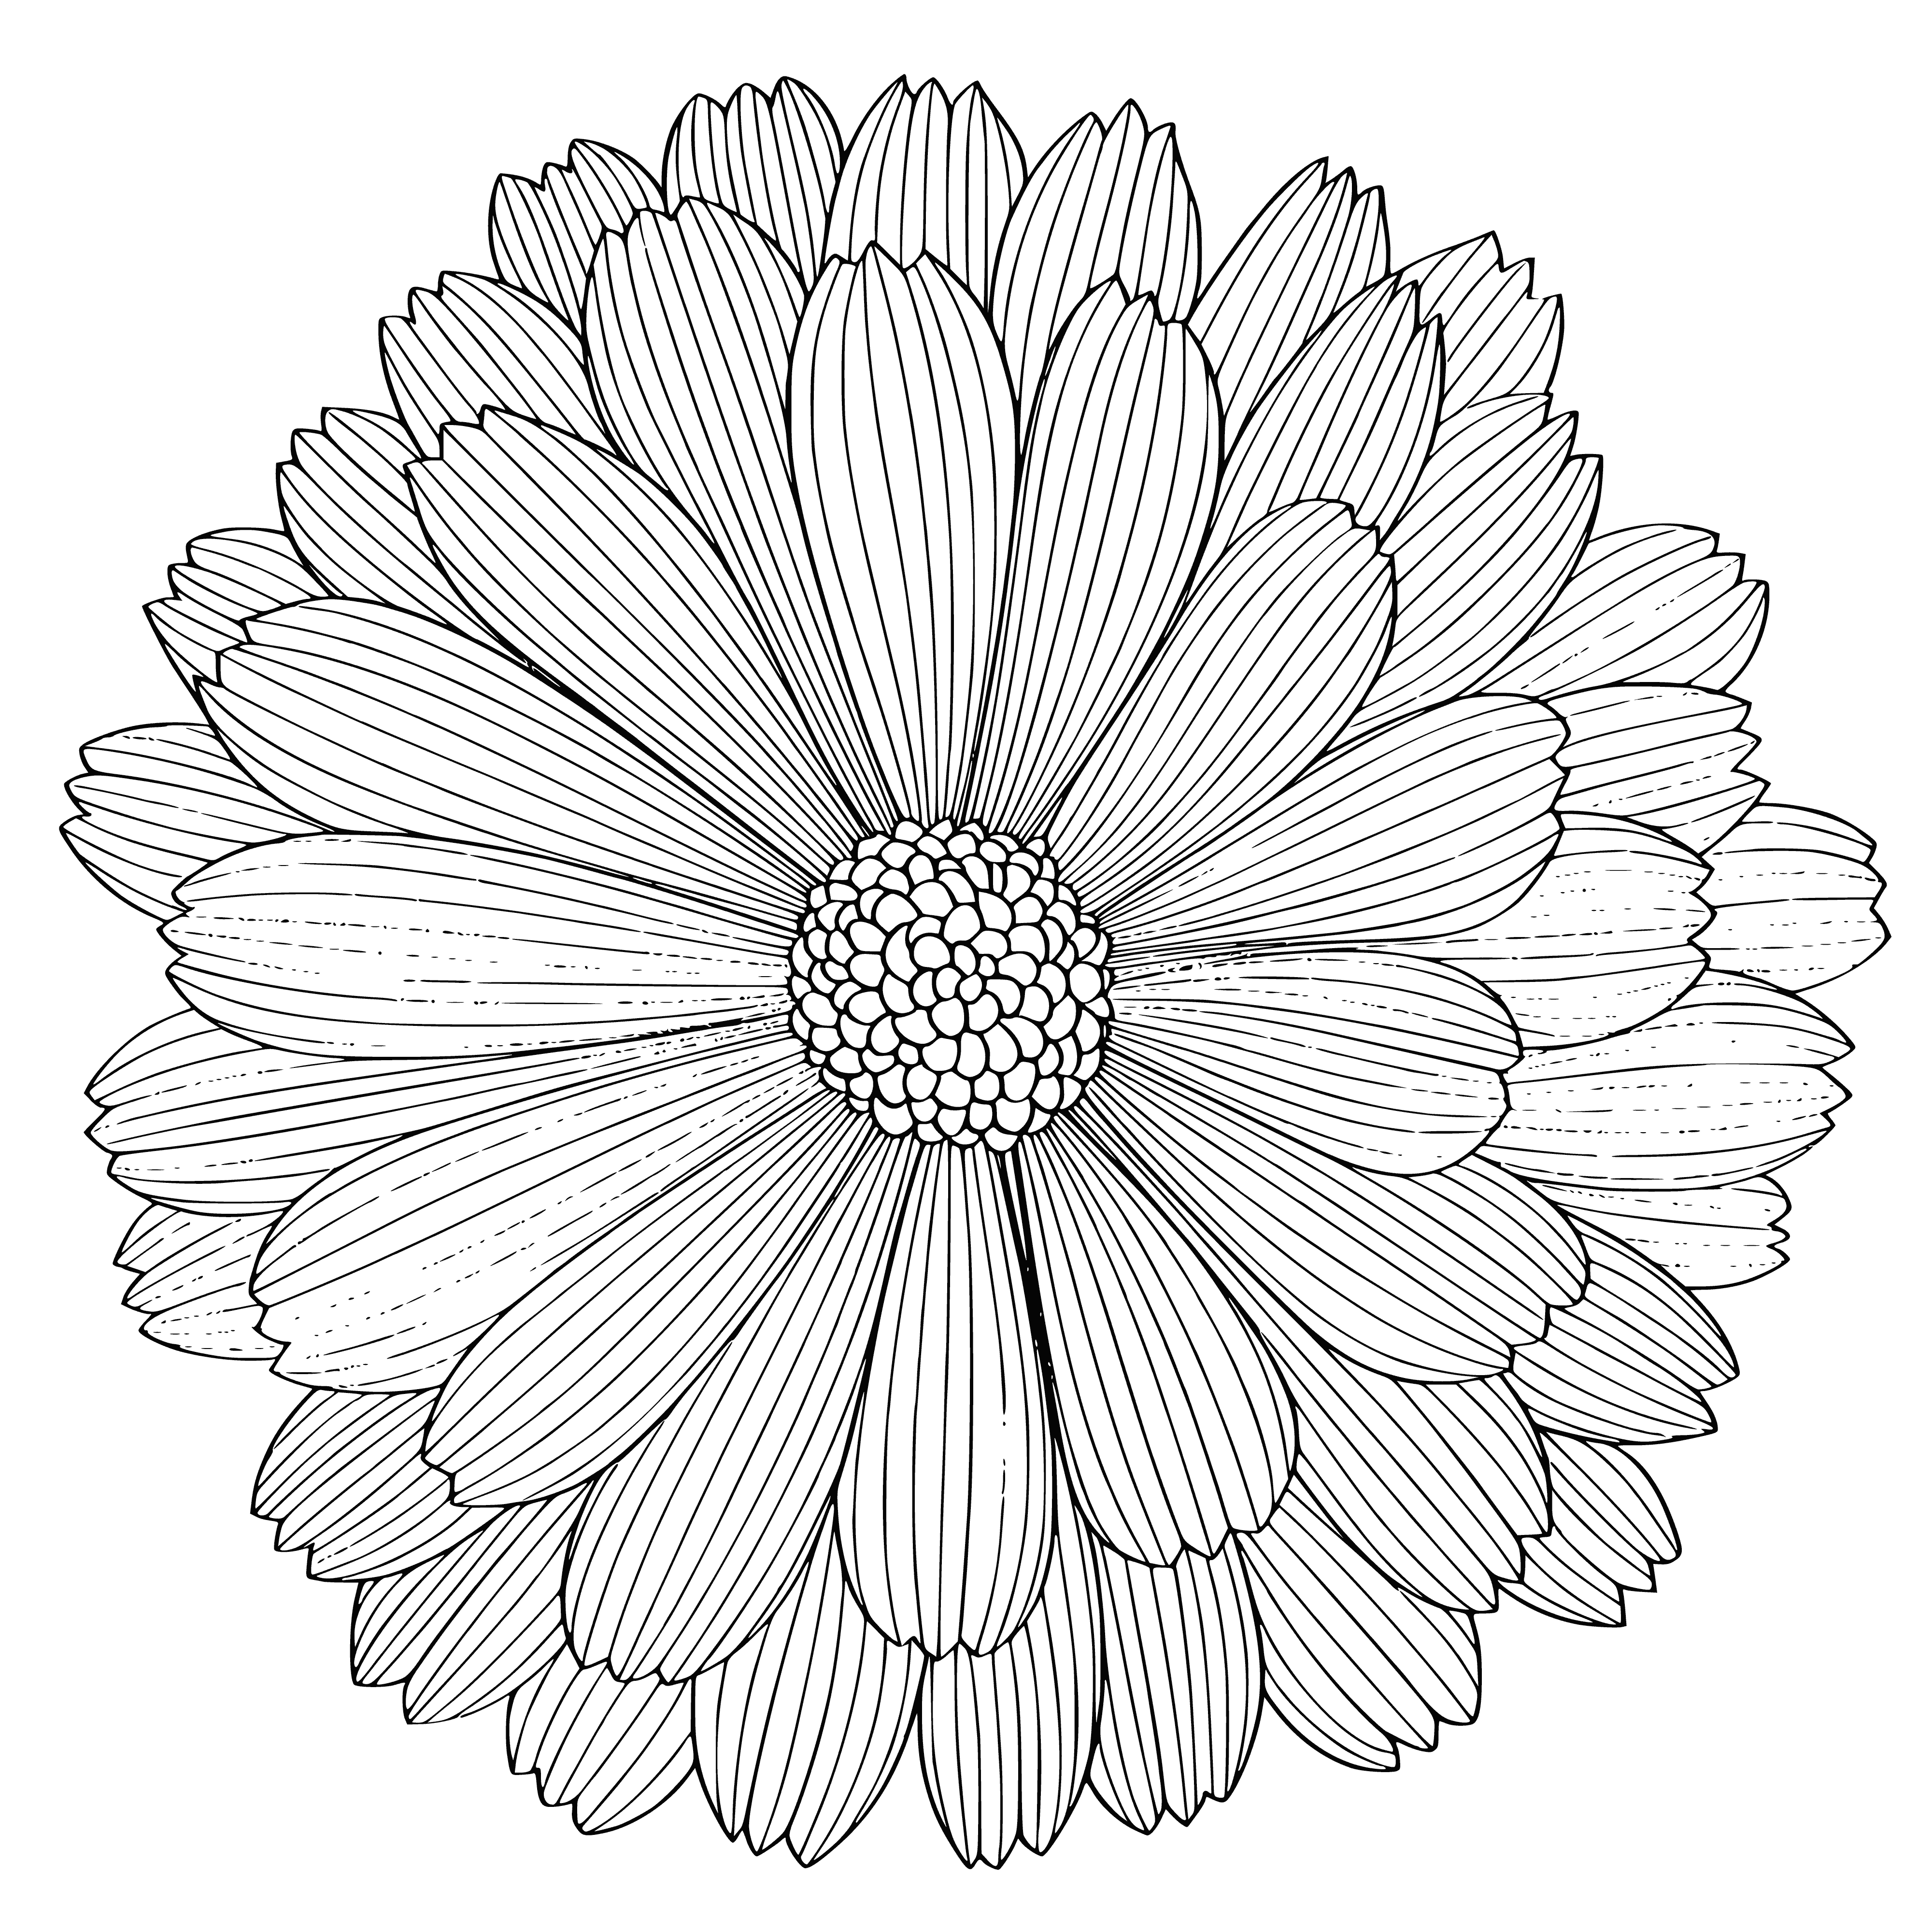 coloring page: Colorful flowers of various shapes and sizes, surrounded by leaves and some with stems, range in color from white to yellow to pink to purple with unique patterns. #ColoringPage